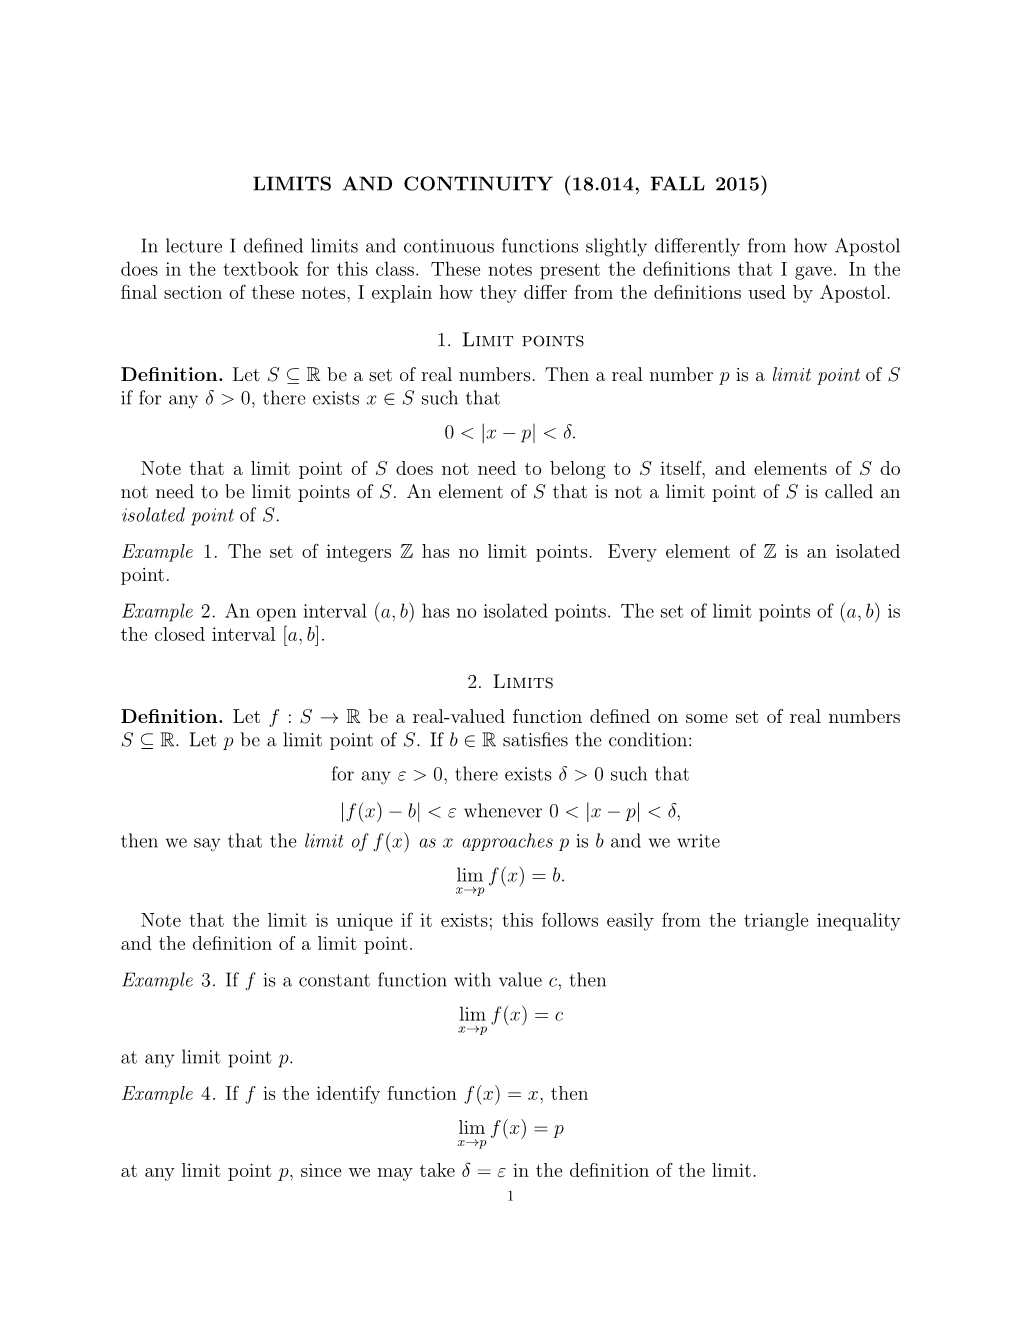 LIMITS and CONTINUITY (18.014, FALL 2015) in Lecture I Defined